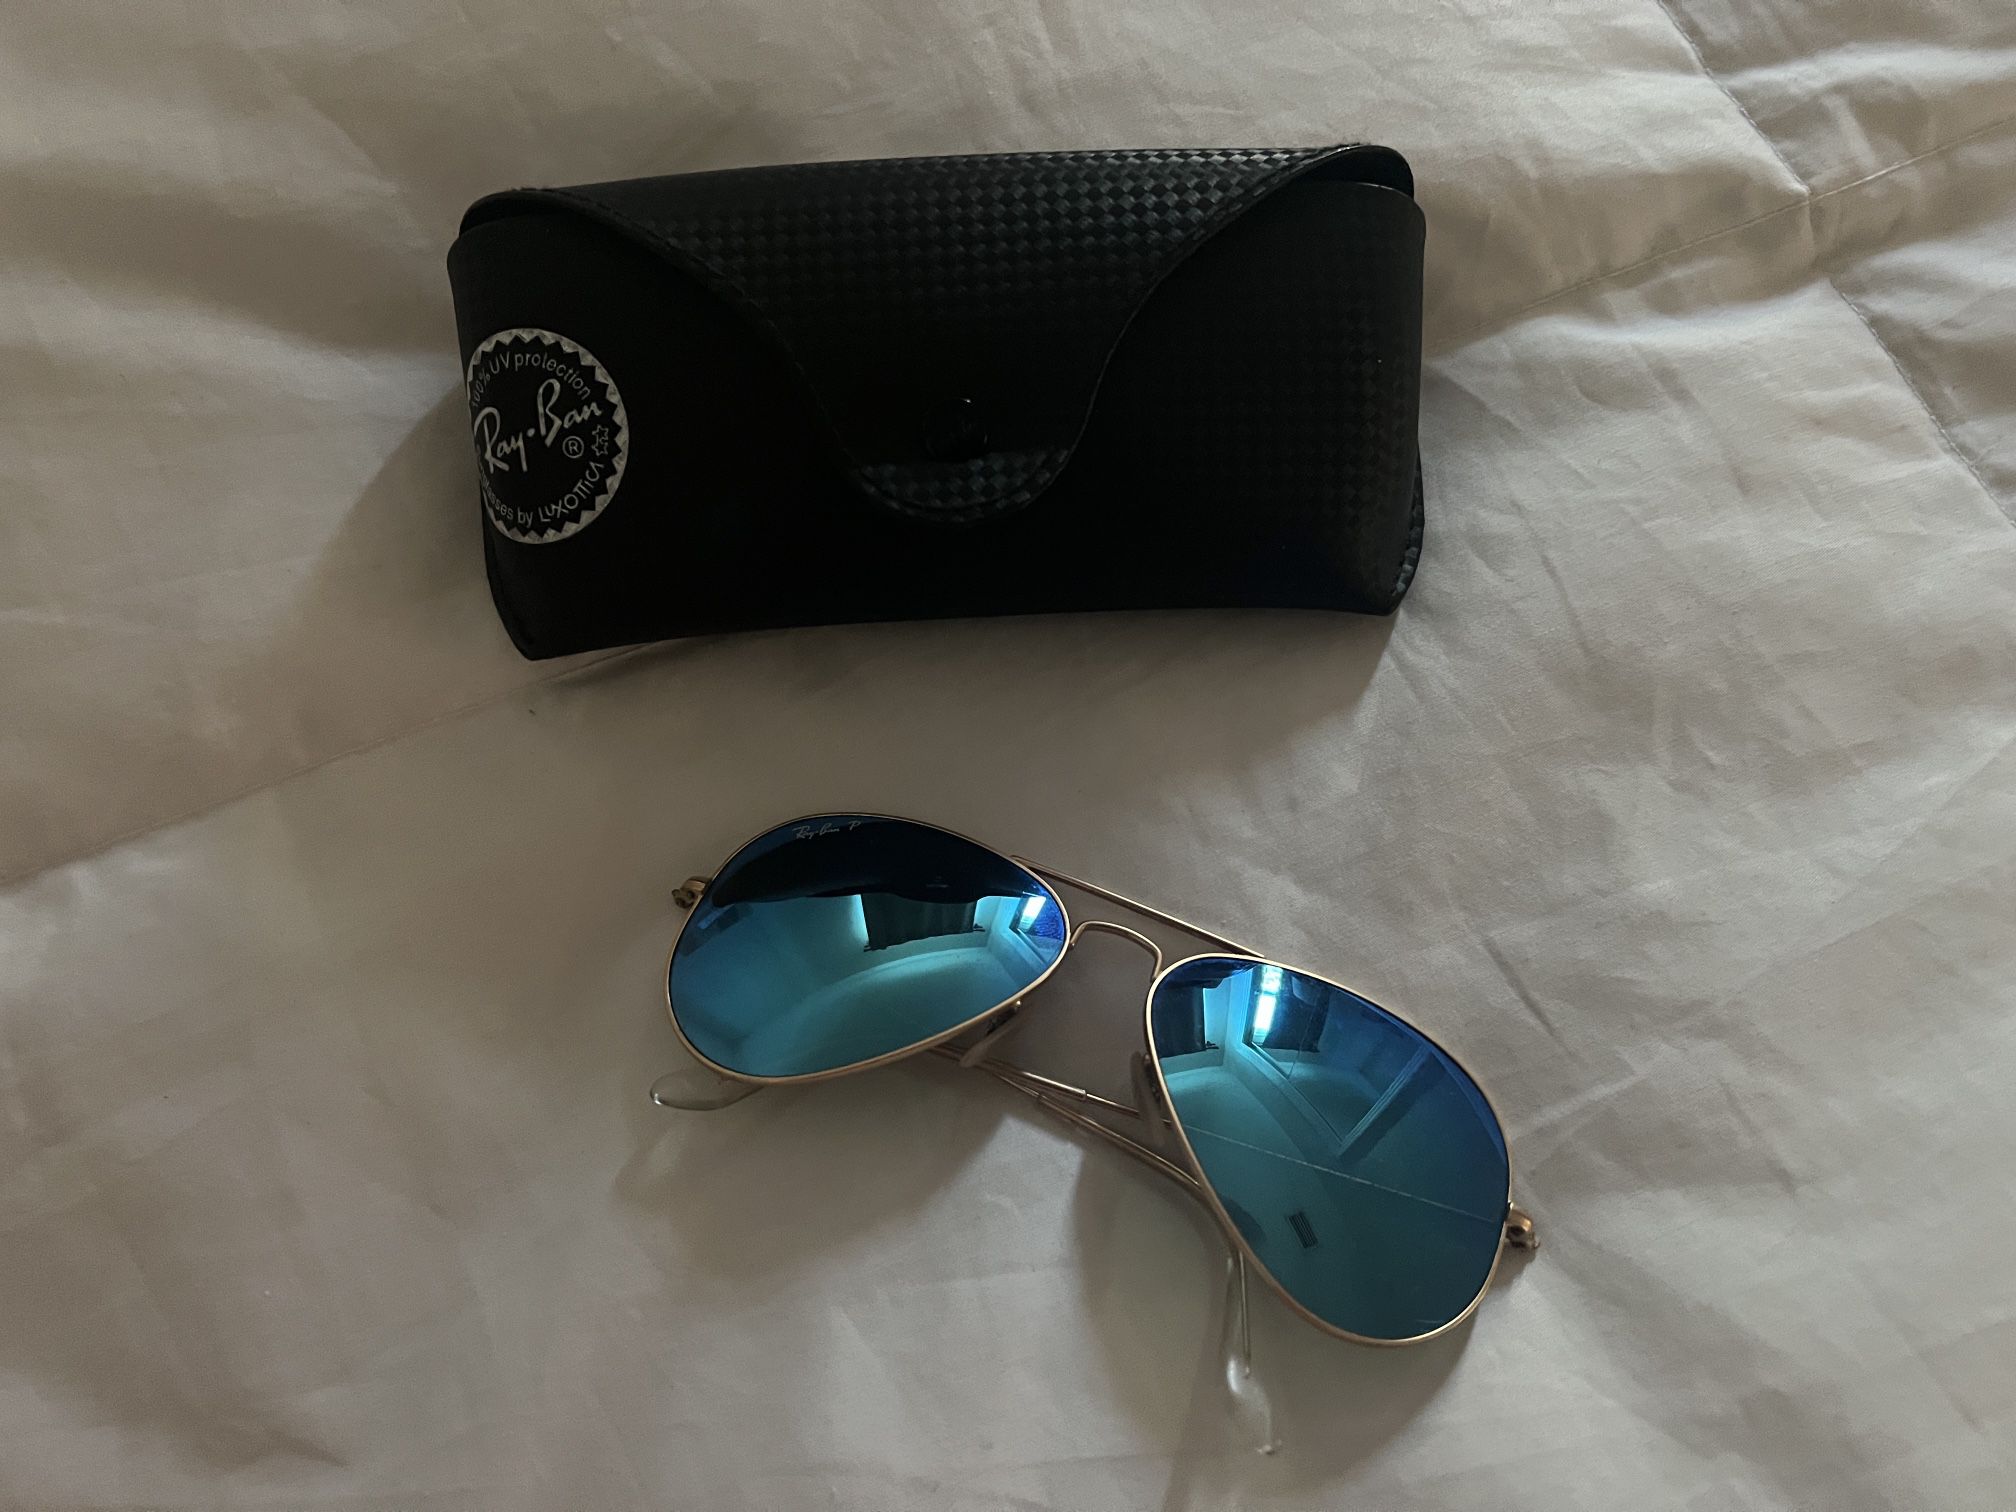 Ray-Ban Blue Mirror Aviators With Case